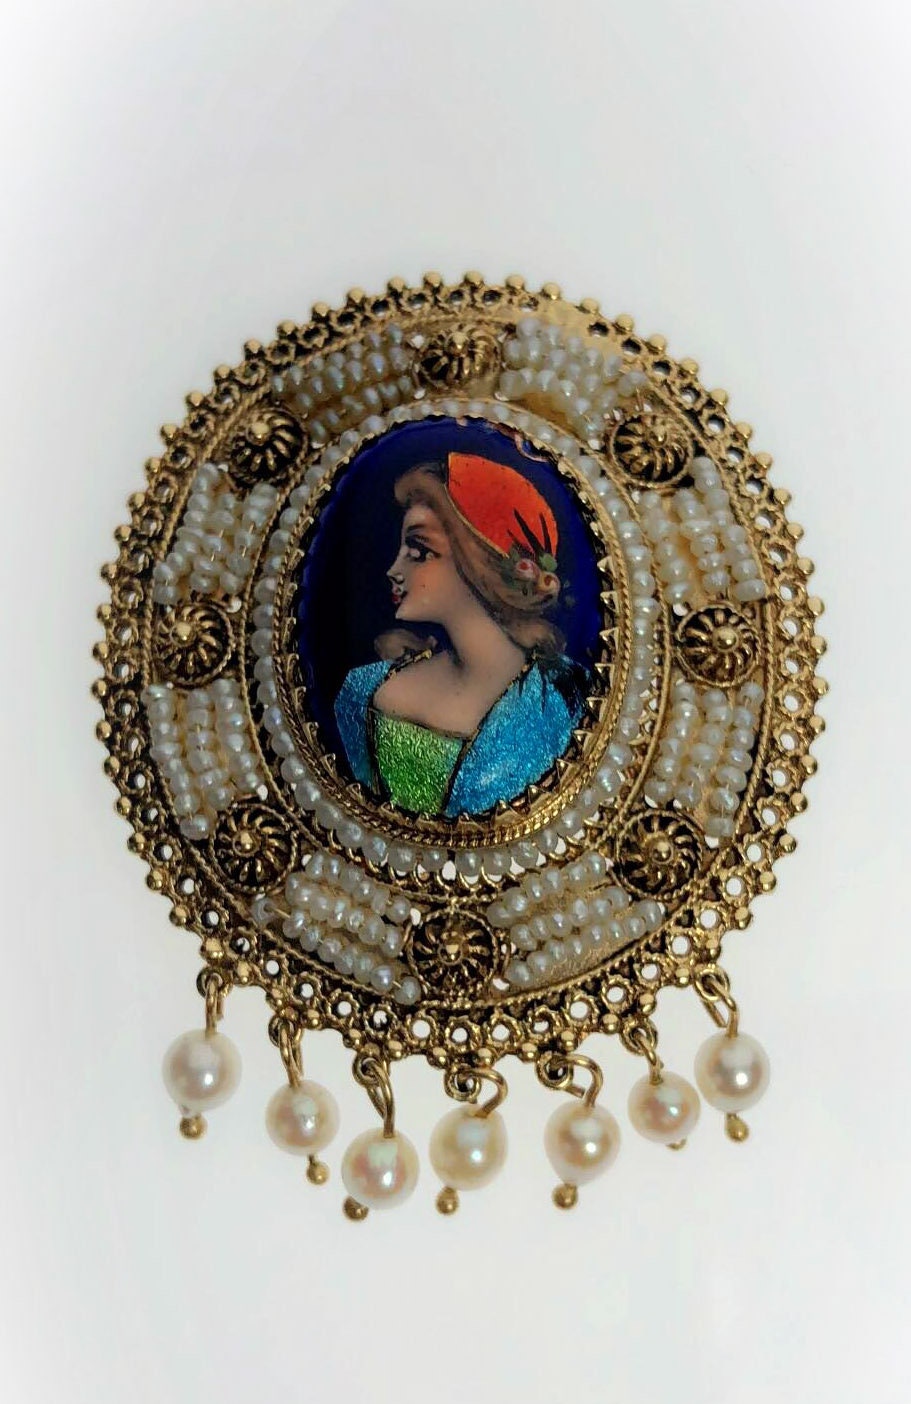 Product Image for 14K Gold Antique French Hand Painted  Cloisonne Limoges Cameo Pendant Brooch with Seed Pearls